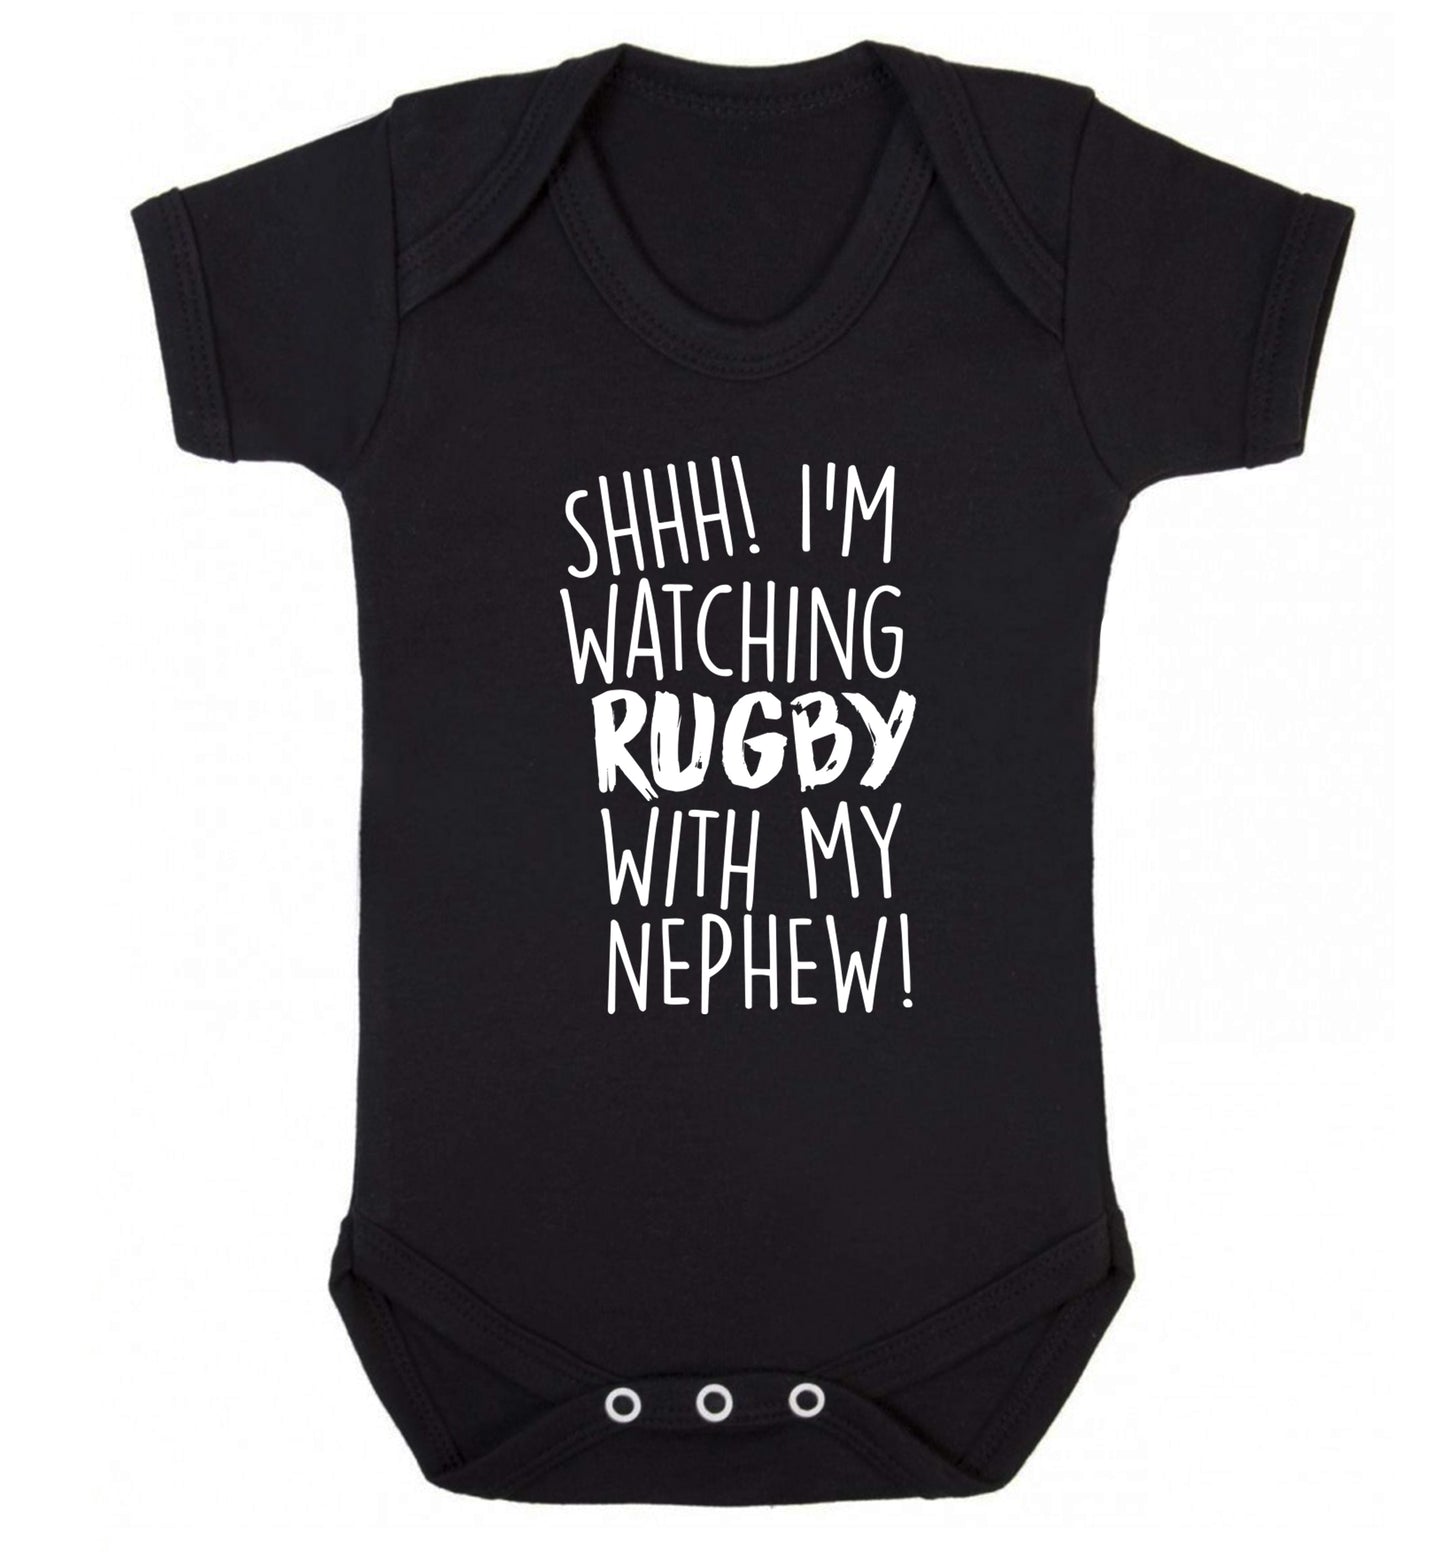 Shh.. I'm watching rugby with my nephew Baby Vest black 18-24 months